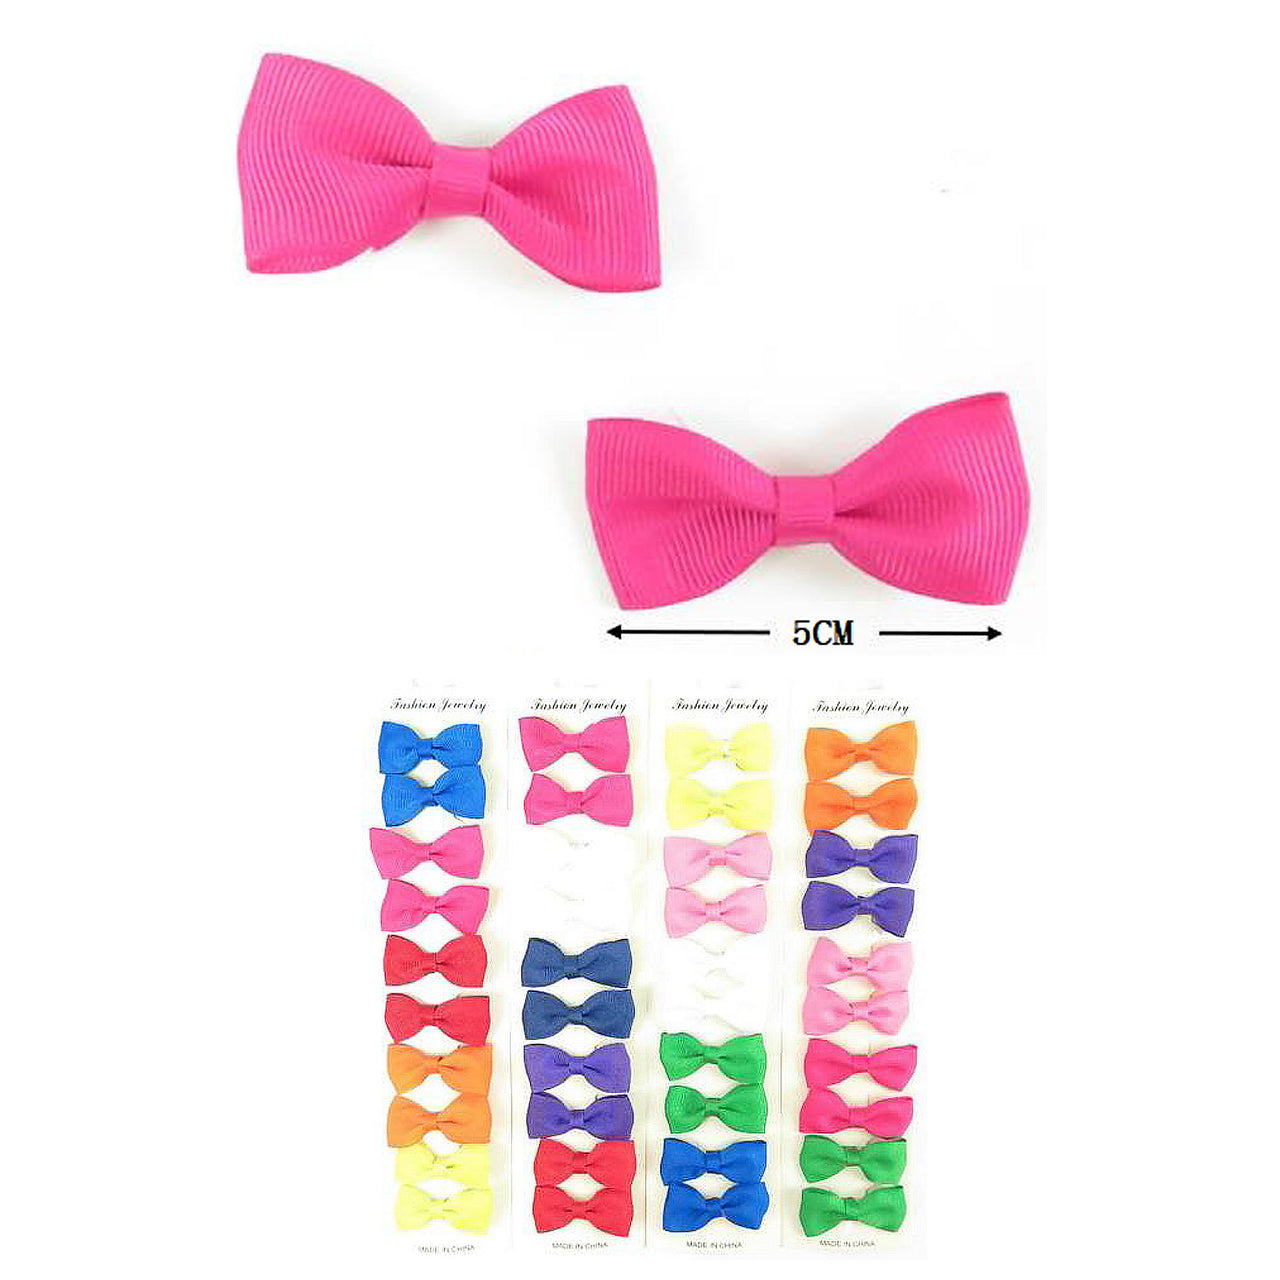 MK-Hair Bow Pin 10 PCS Solid Assorted H1847 1DZ